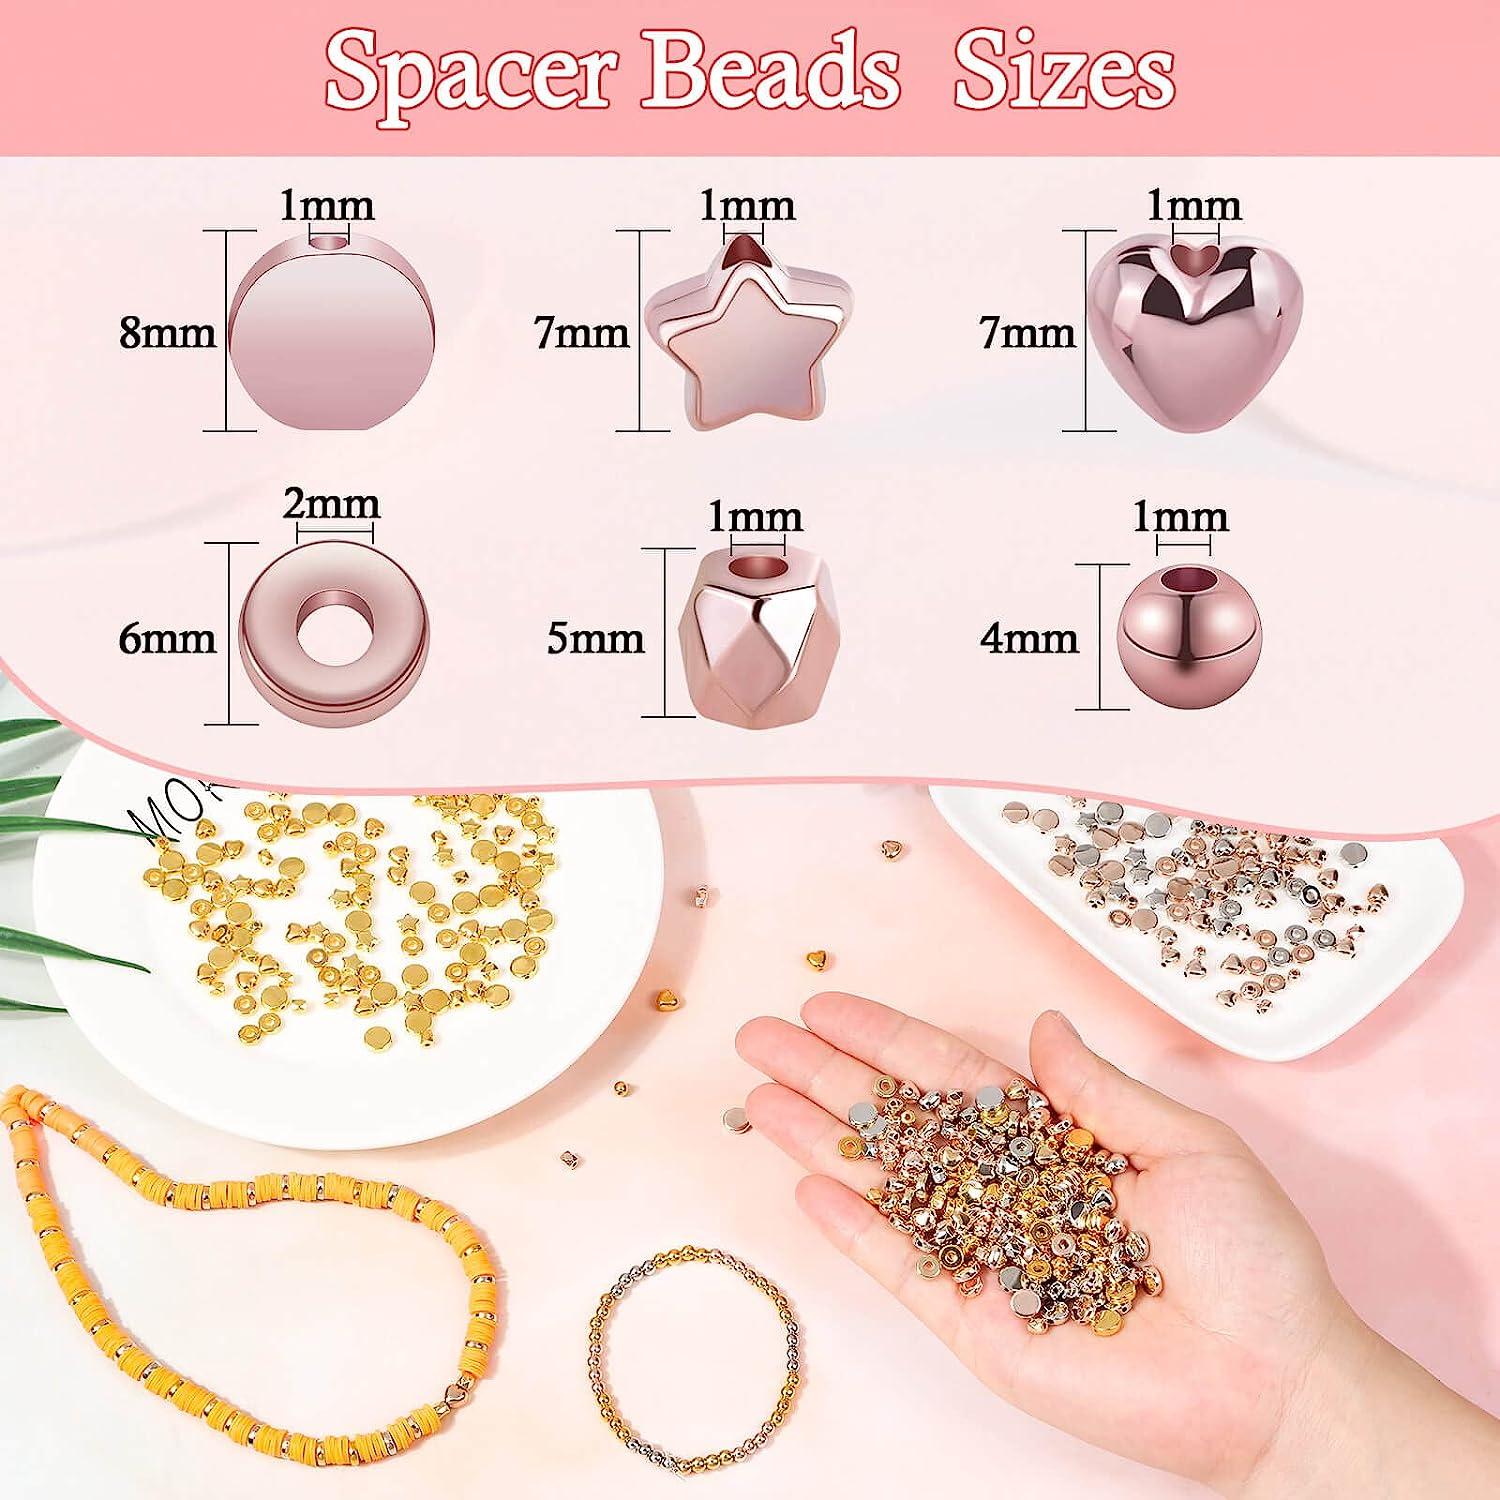 2160 Pieces Gold Spacer Beads Set, Assorted Bracelet Beads Round Beads Star Beads  Gold Beads for Bracelet Jewelry Making(Gold, Sliver, Rose Gold, KC Gold) CCB